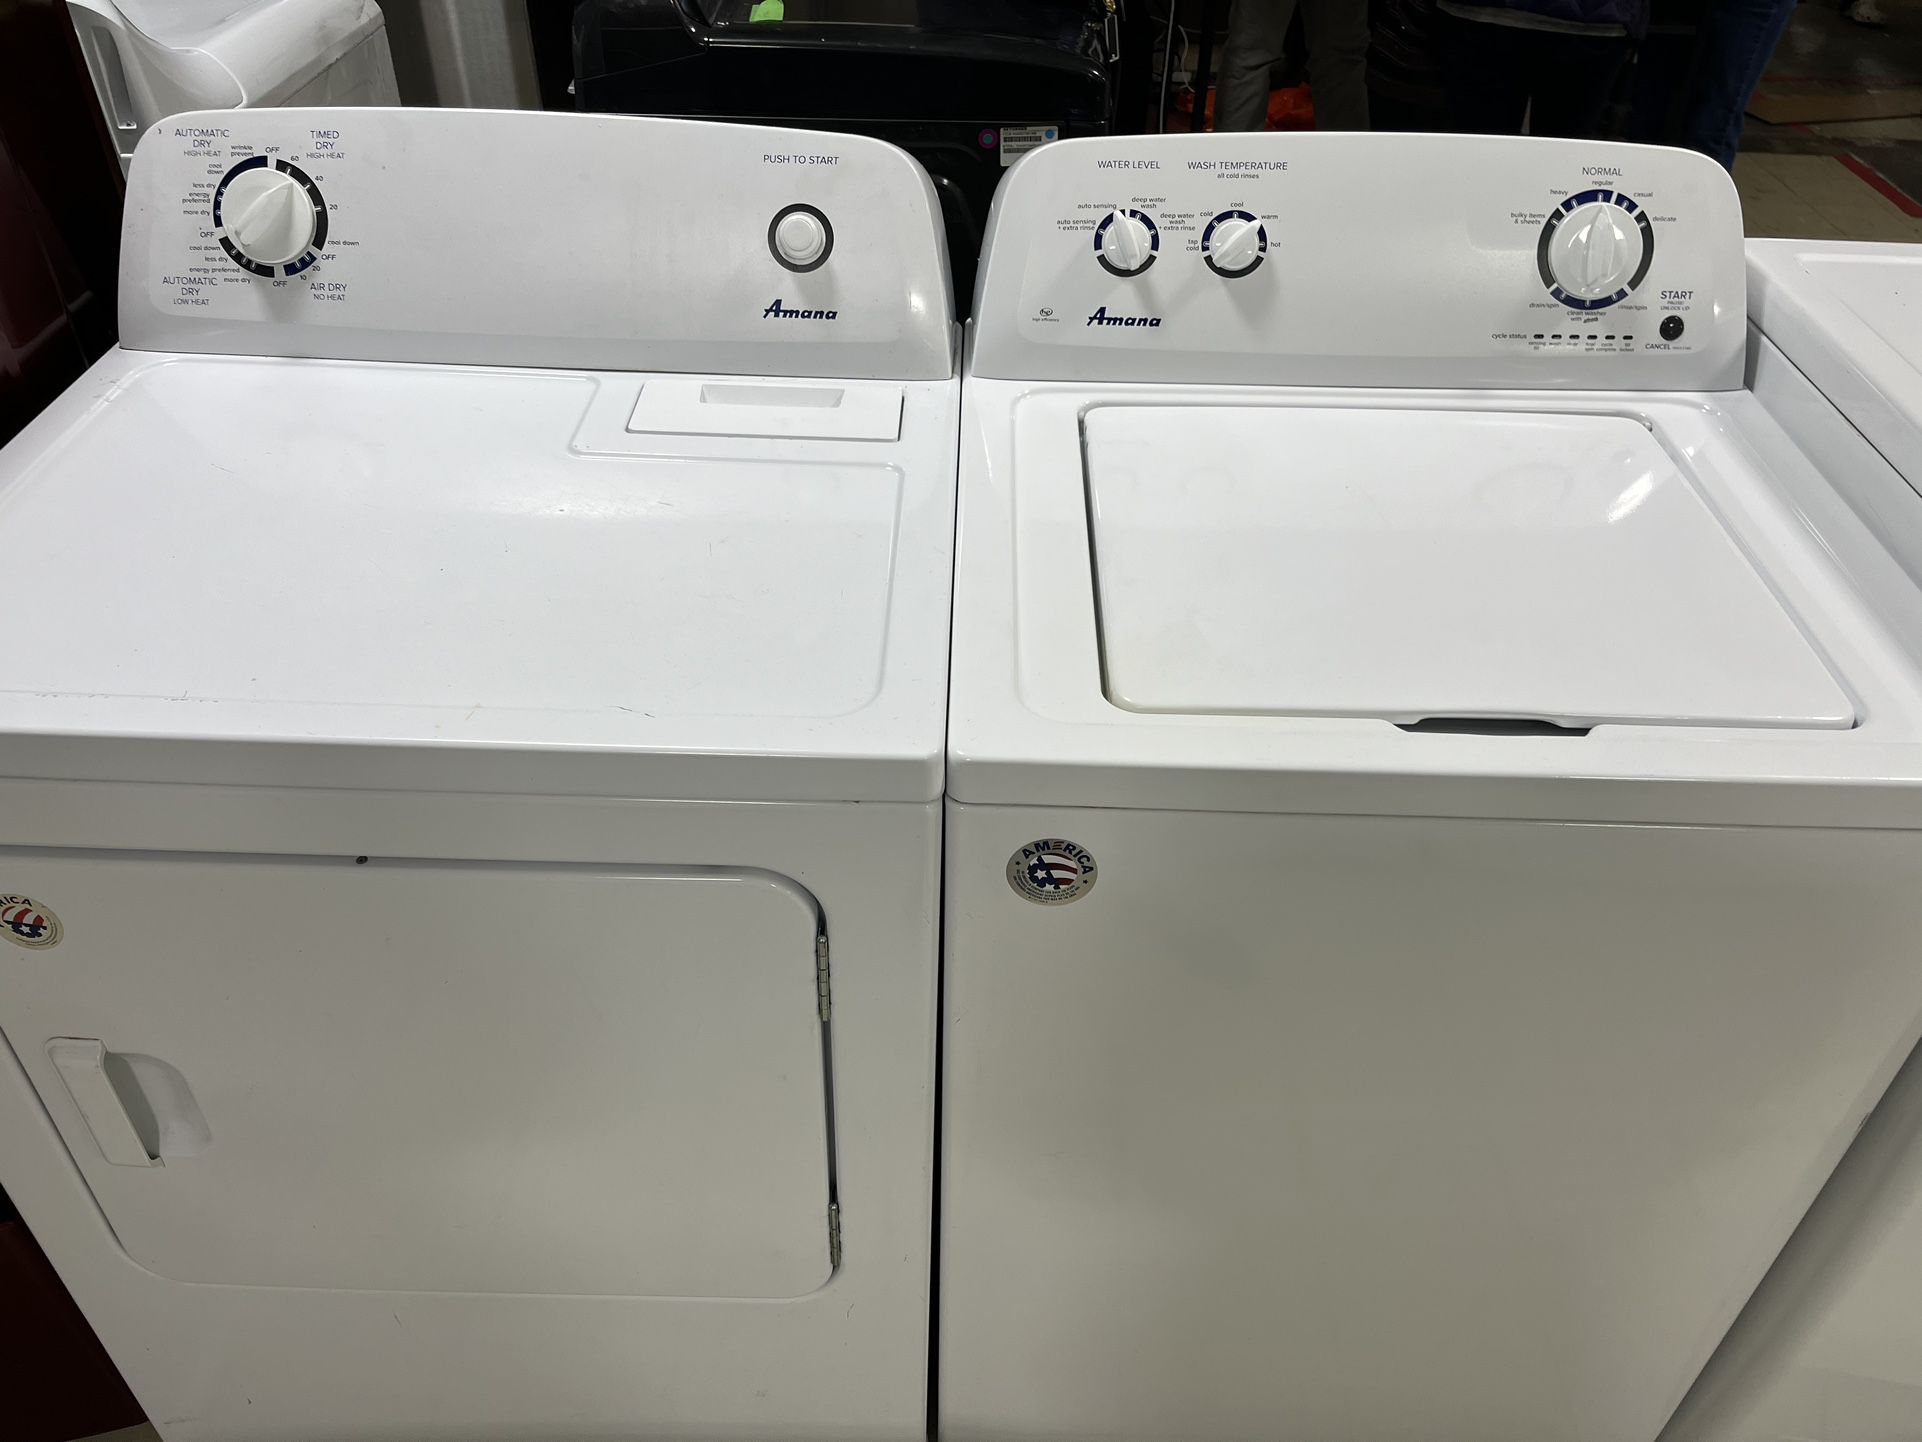  Amana Washer And Dryer